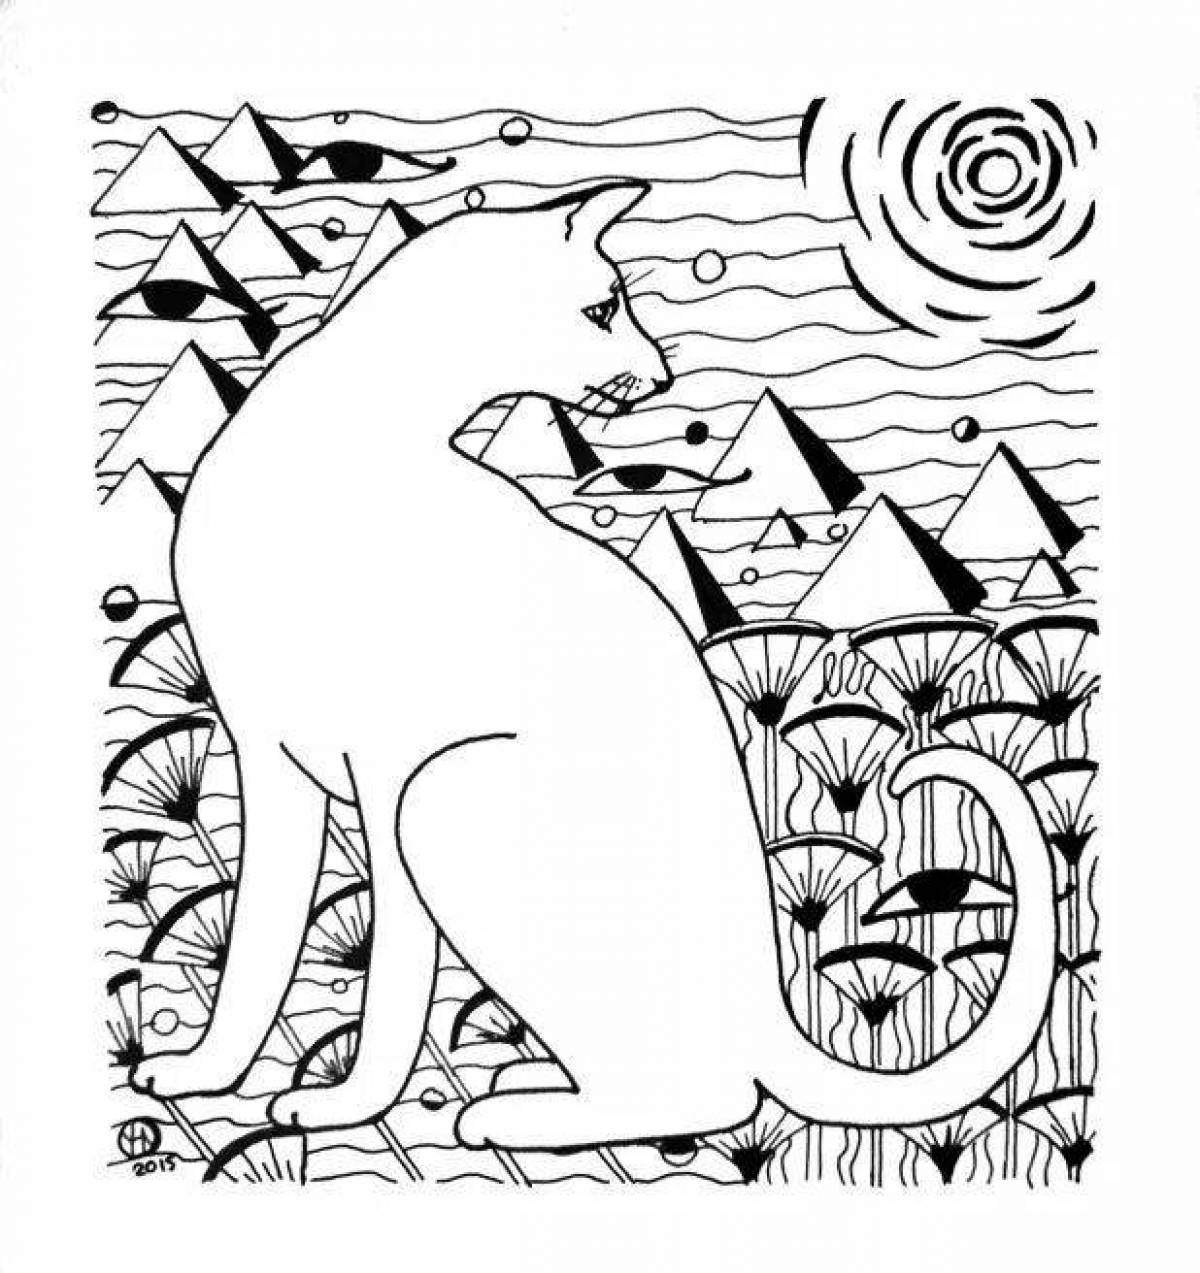 Awesome egyptian cat coloring page